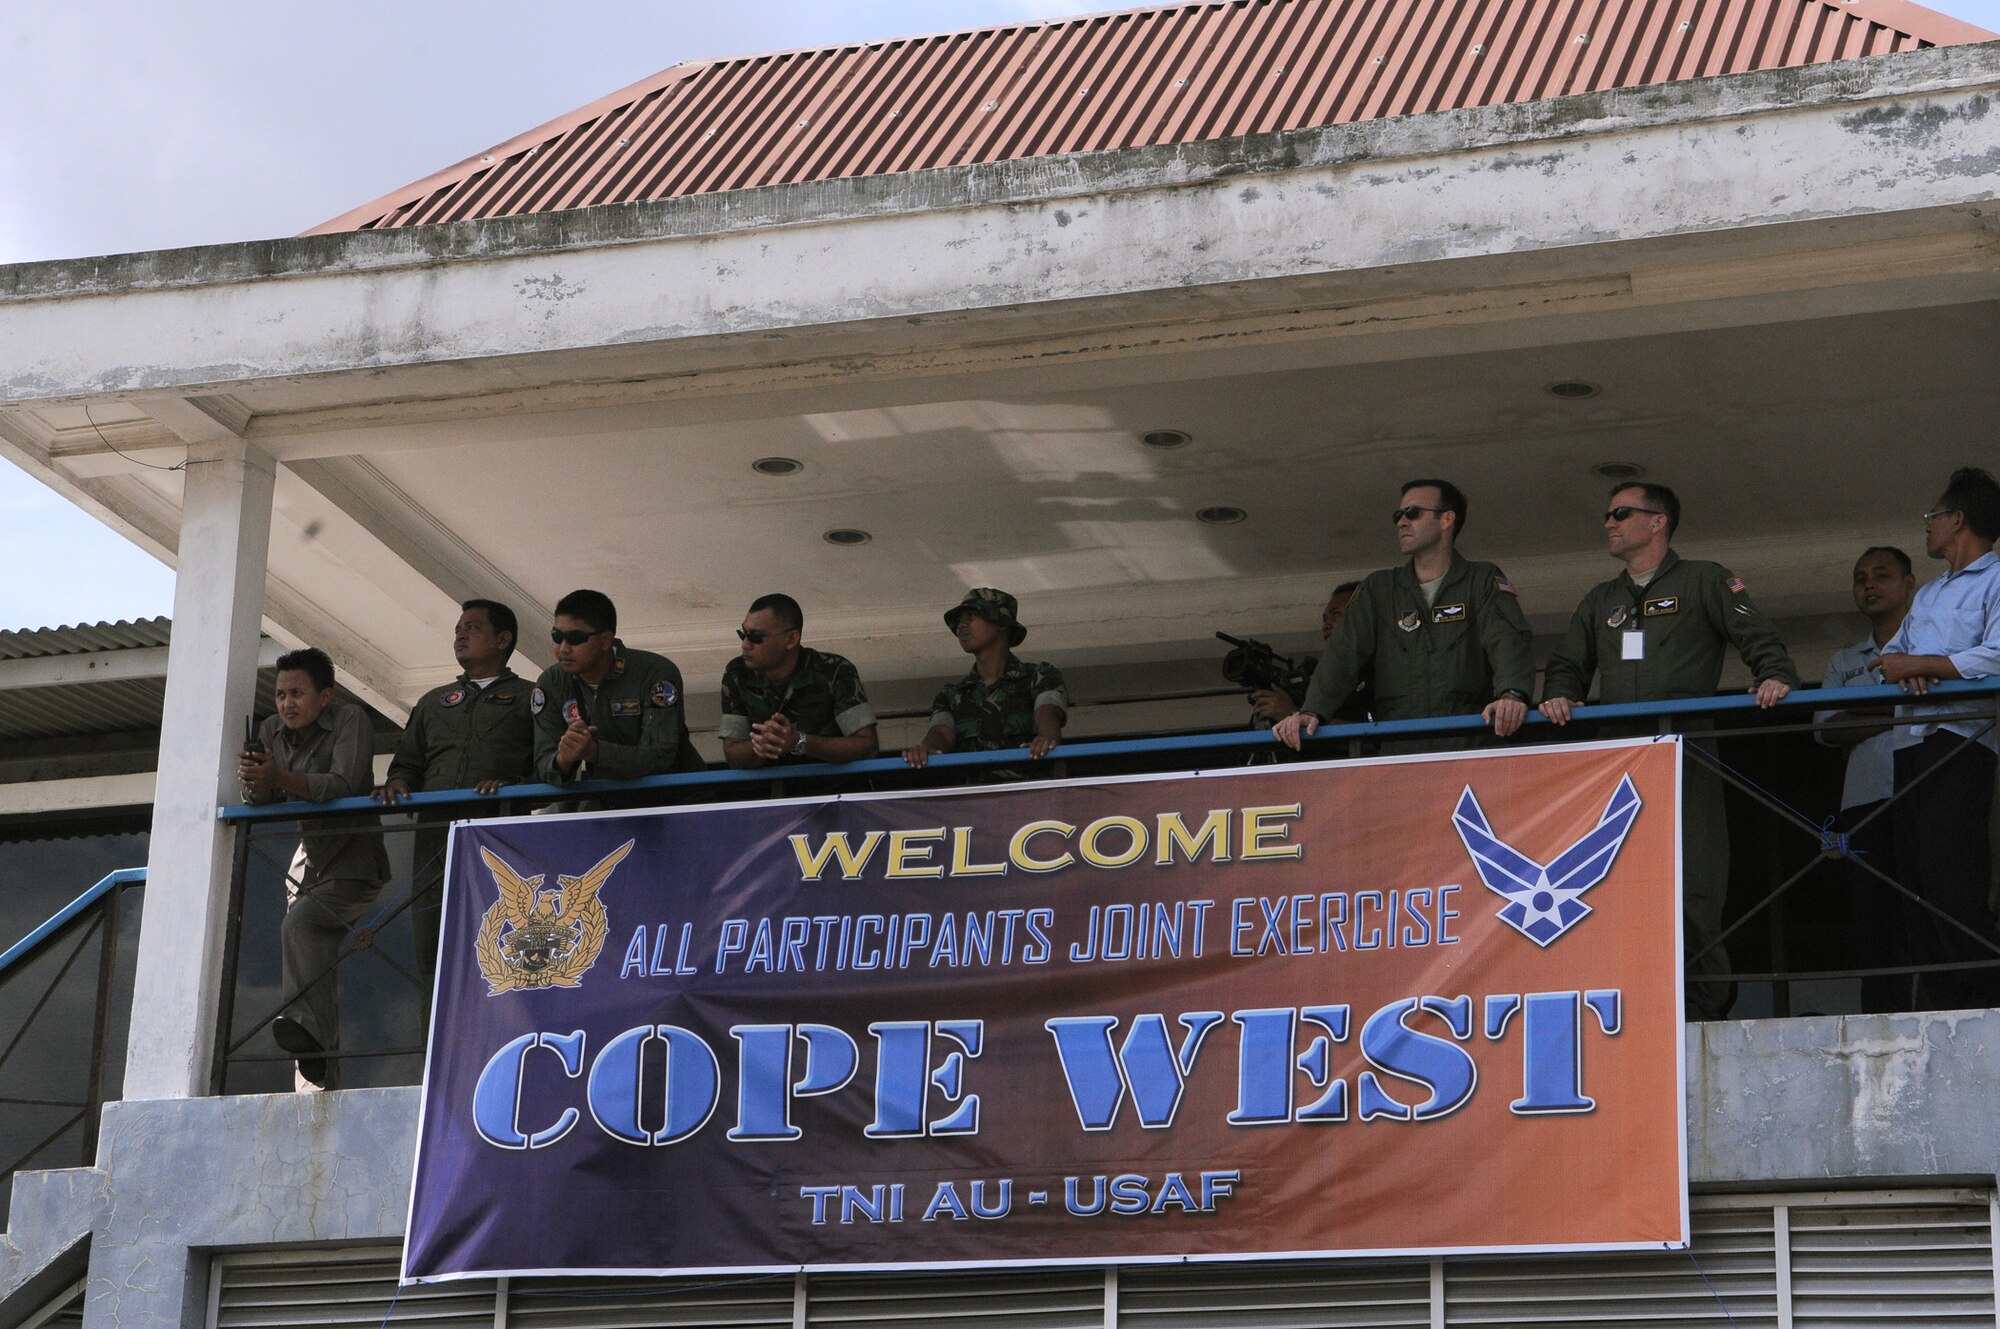 Two officers discuss various scenarios that U.S. and Indonesian airmen will participate in during Exercise Cope West 2010 April 17, 2010, at Halim Air Base, Indonesia. (U.S. Air Force photo)